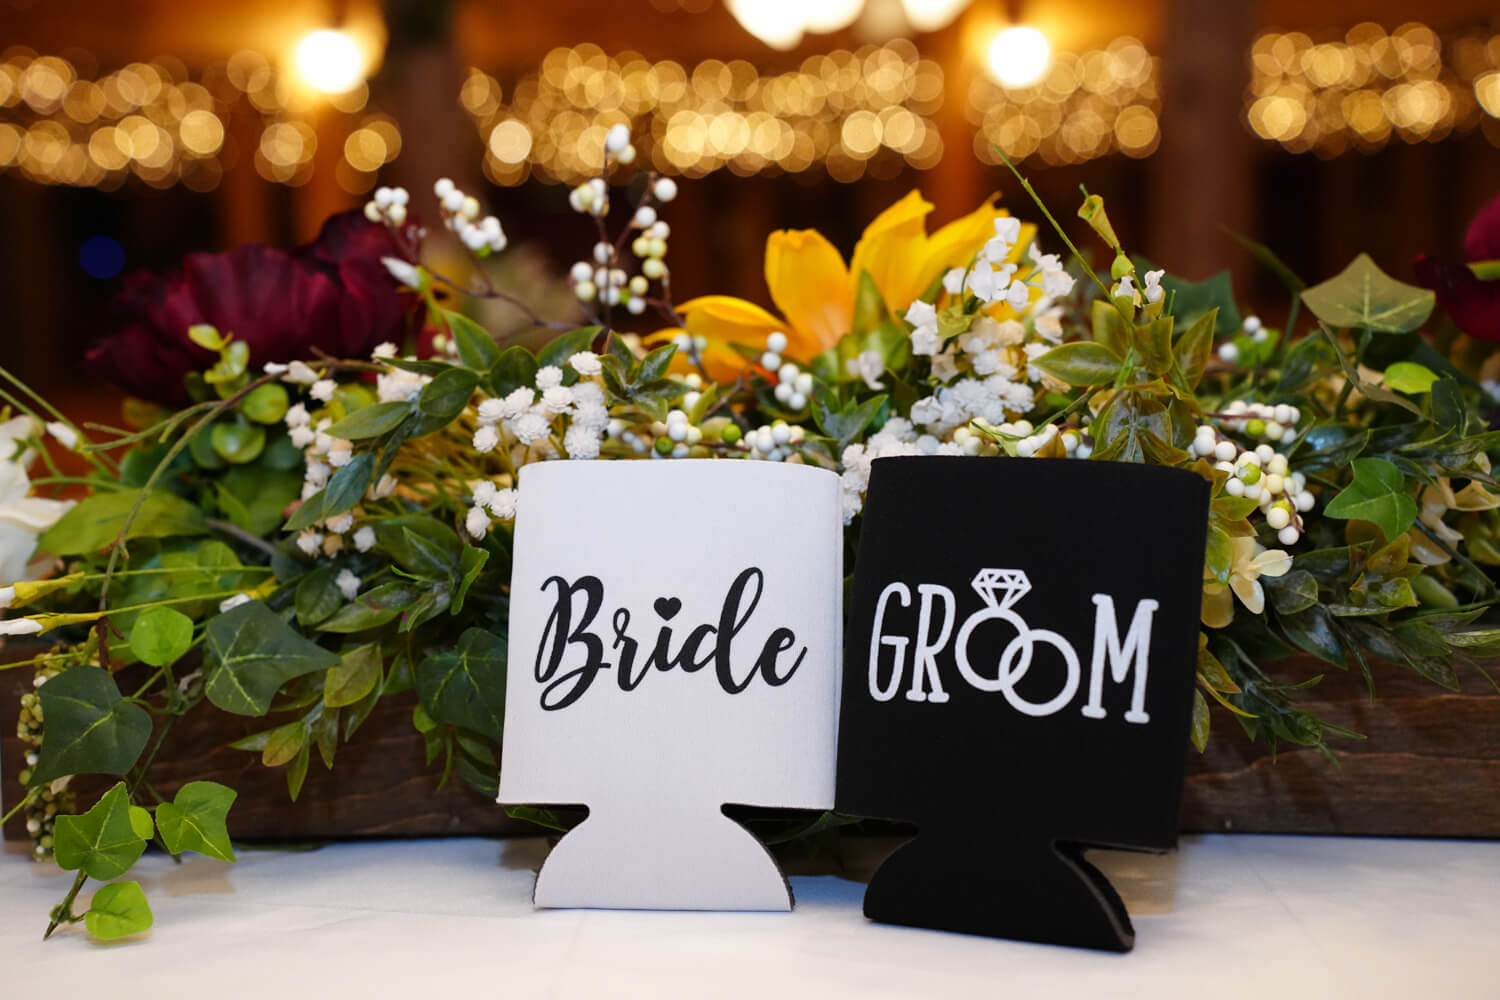 Bride and groom koozies sitting on a table with white flowers and warm string lights in the background